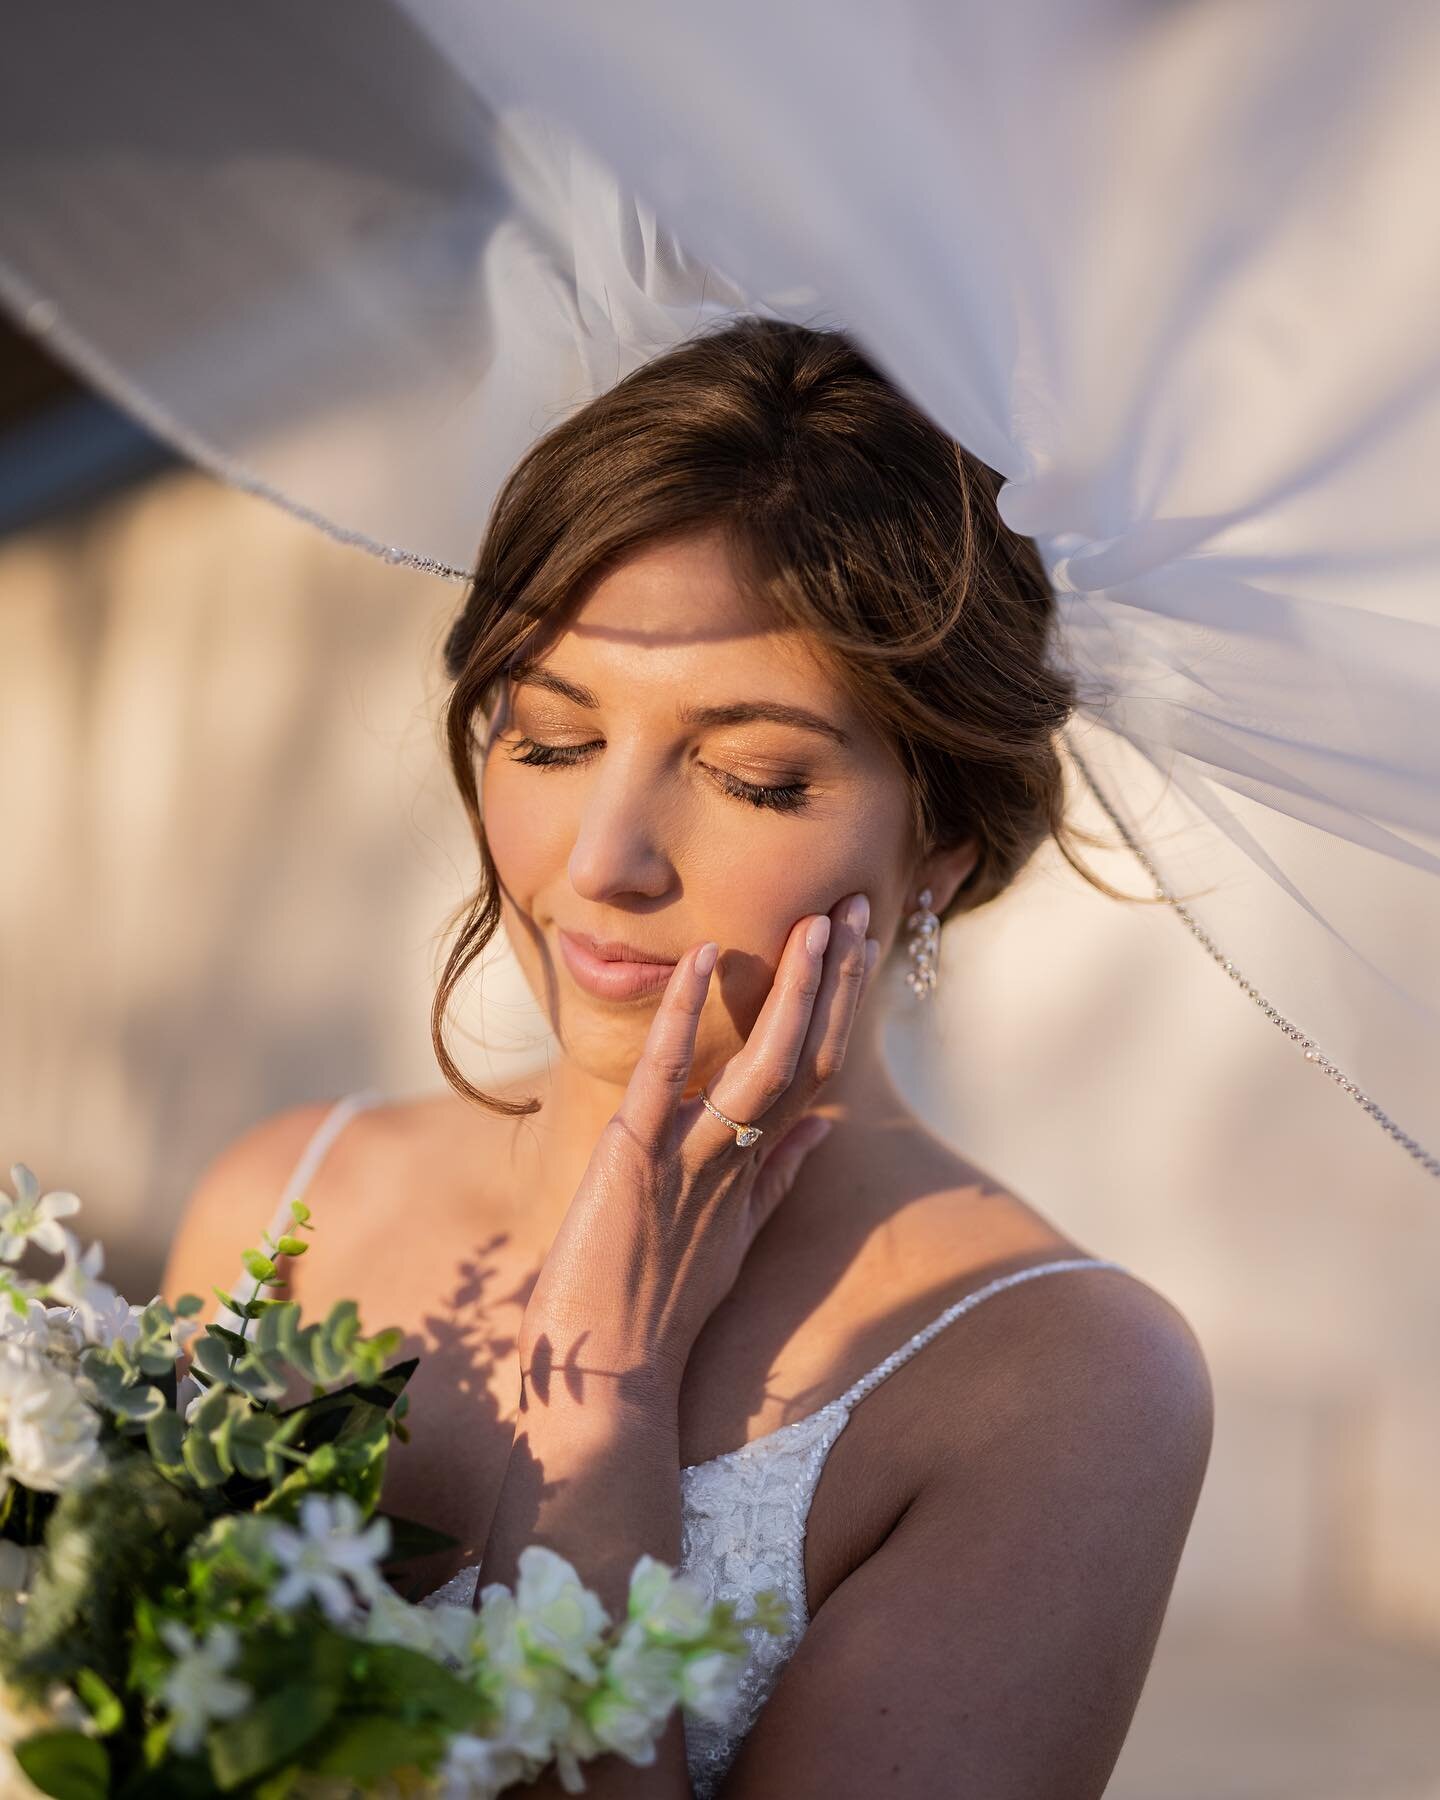 Meredith was the MOST beautiful bride. 🤍 I am so excited to finally be able to share her bridals!! She is the definition of classic beauty. Gorgeous inside and out. #farleychosewright 
Makeup: @beautyfrombrusheschelsearae 
Hair: @alicearob 
.
.
.
.
